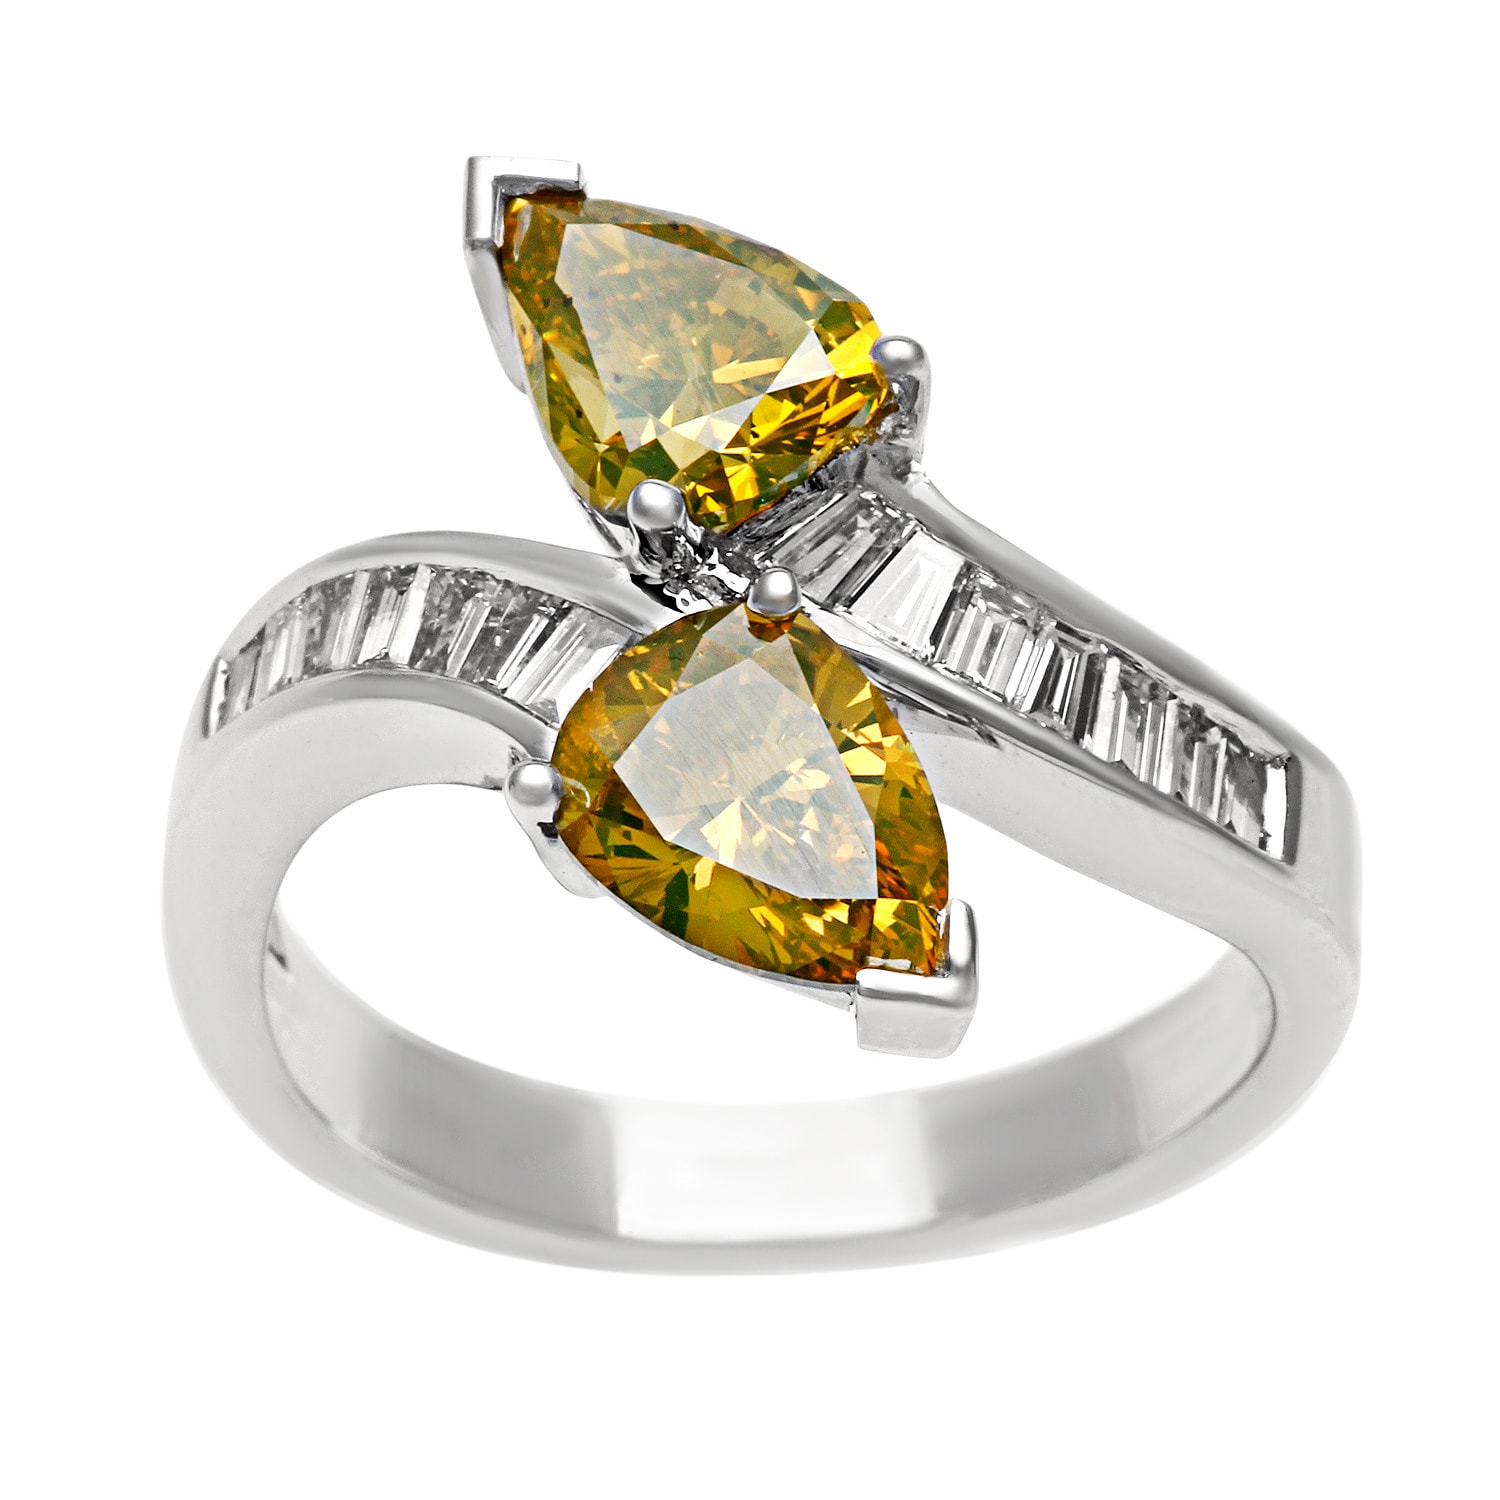 Shop 18k Gold 2 34ct Tdw Yellow And White Diamond Bypass Ring G H